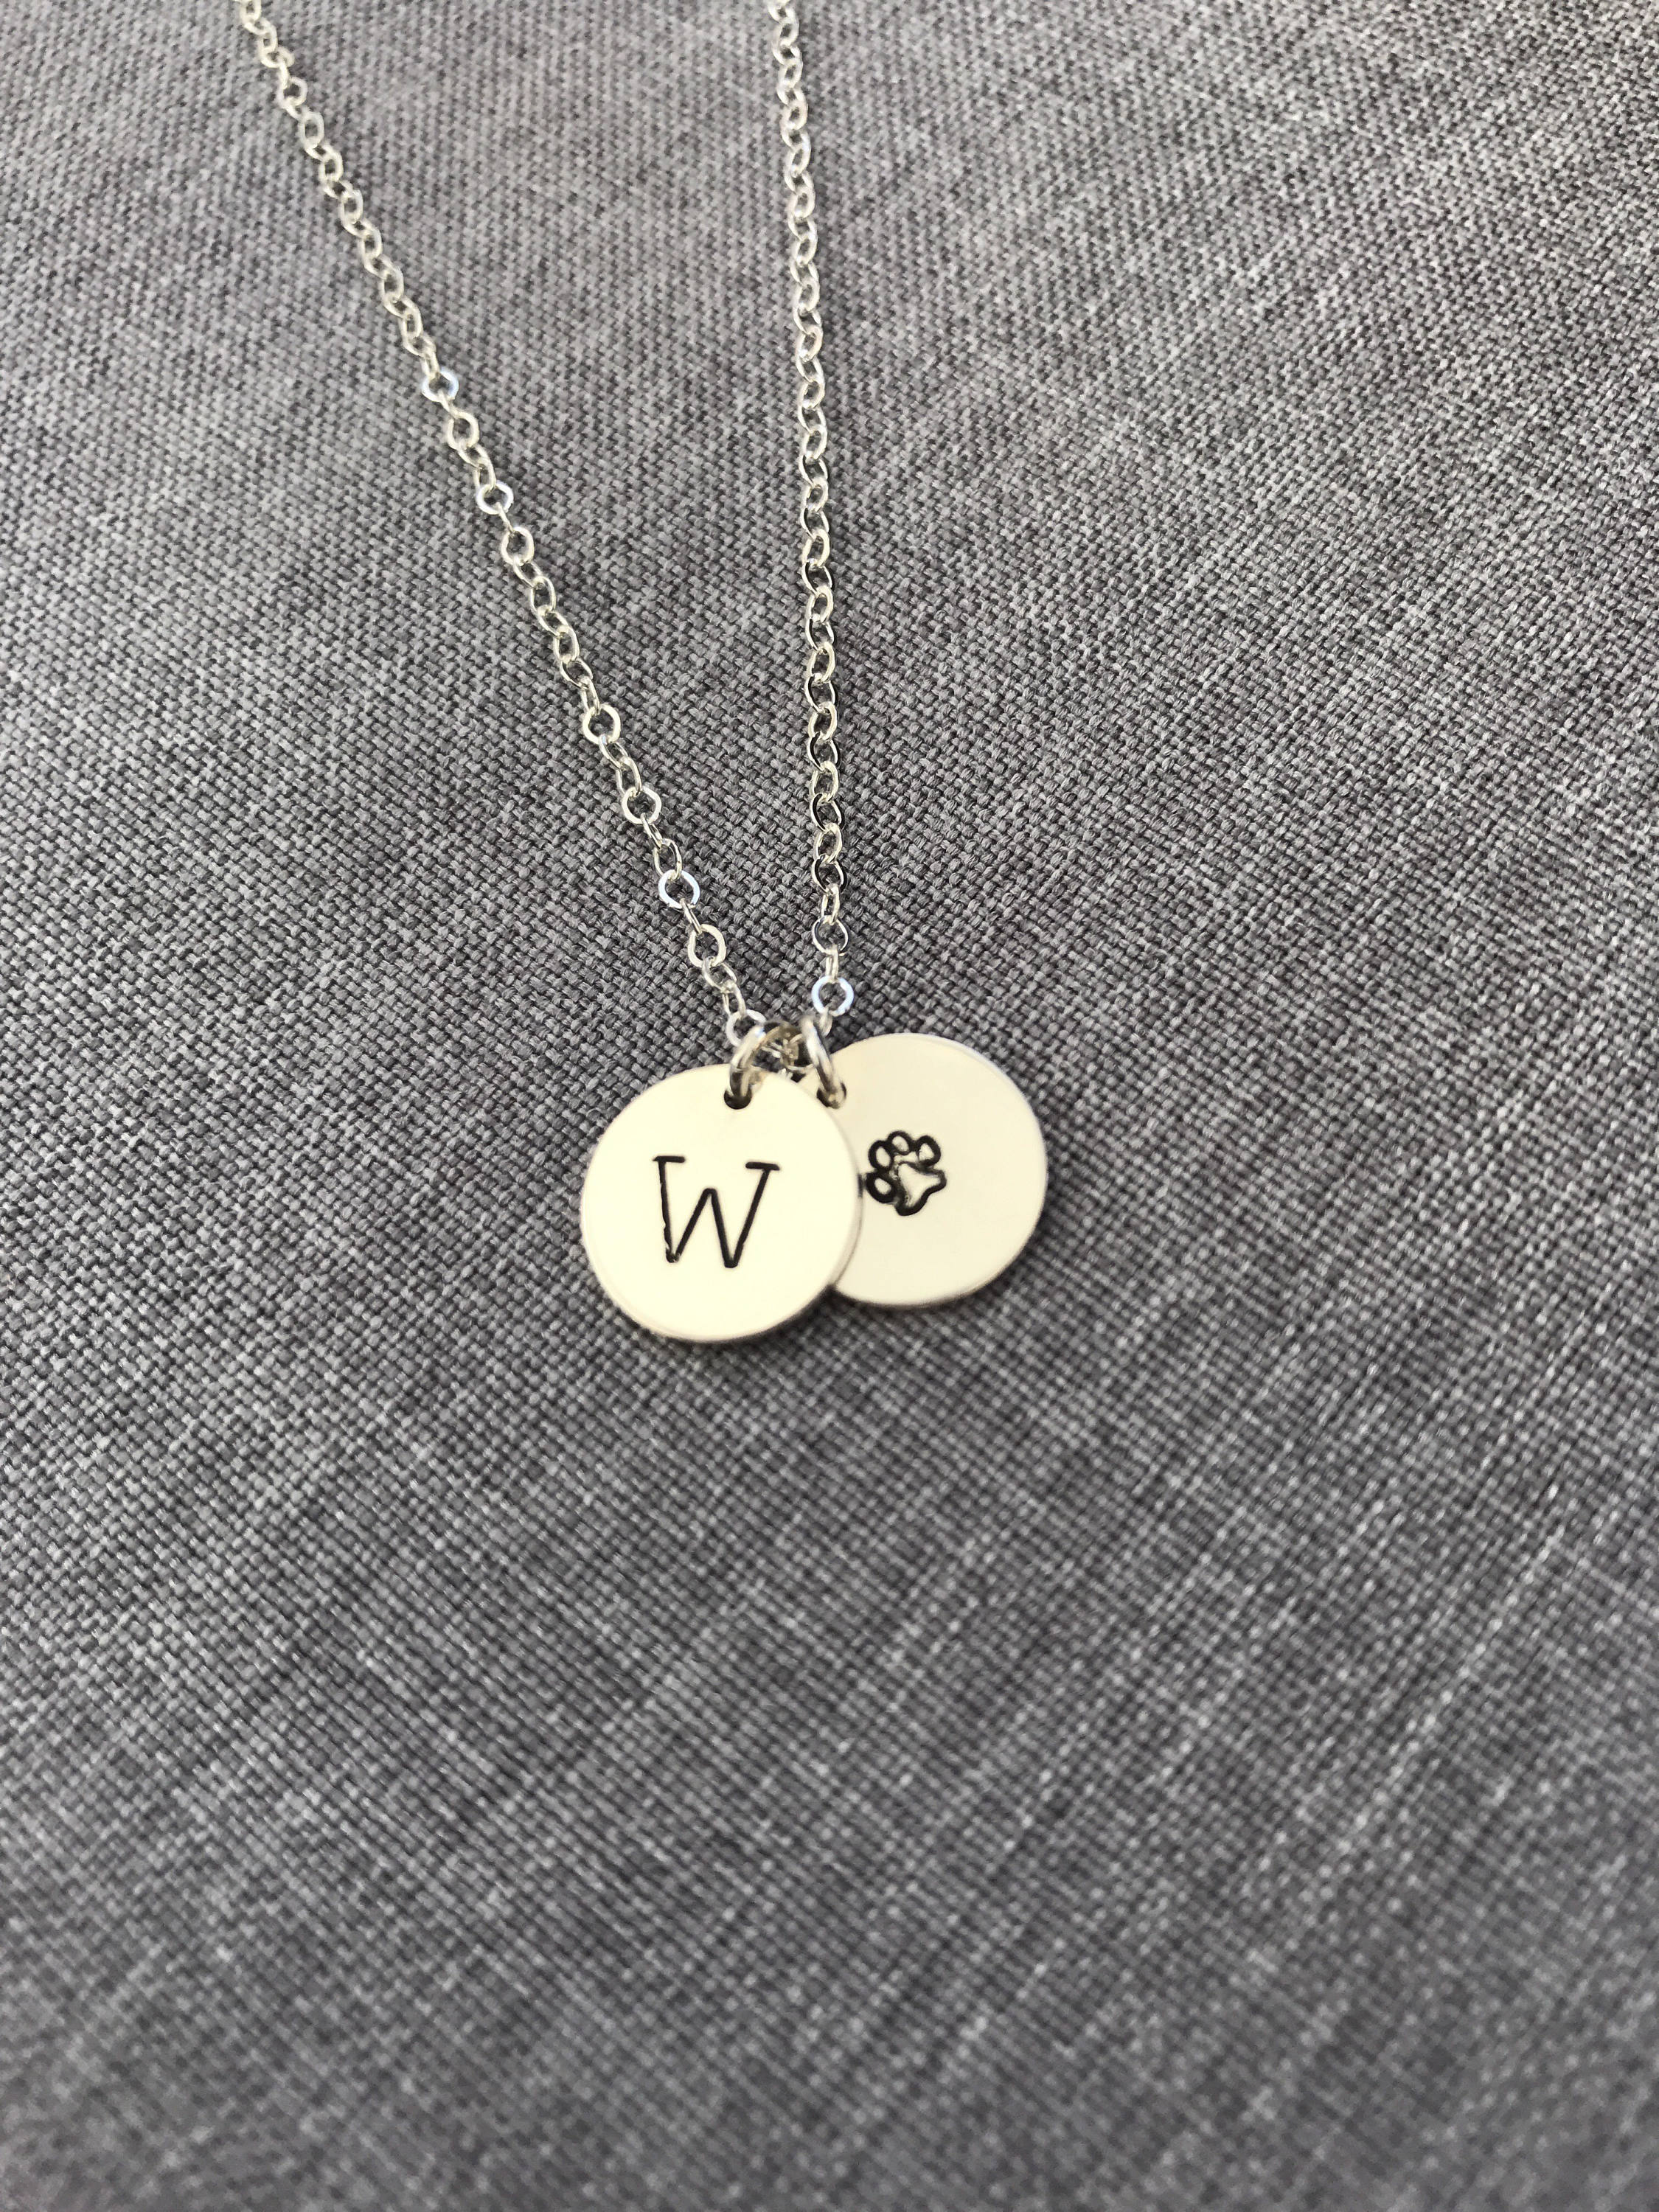 Custom Monogram Necklace Initial Necklace Personalized Disc | Etsy